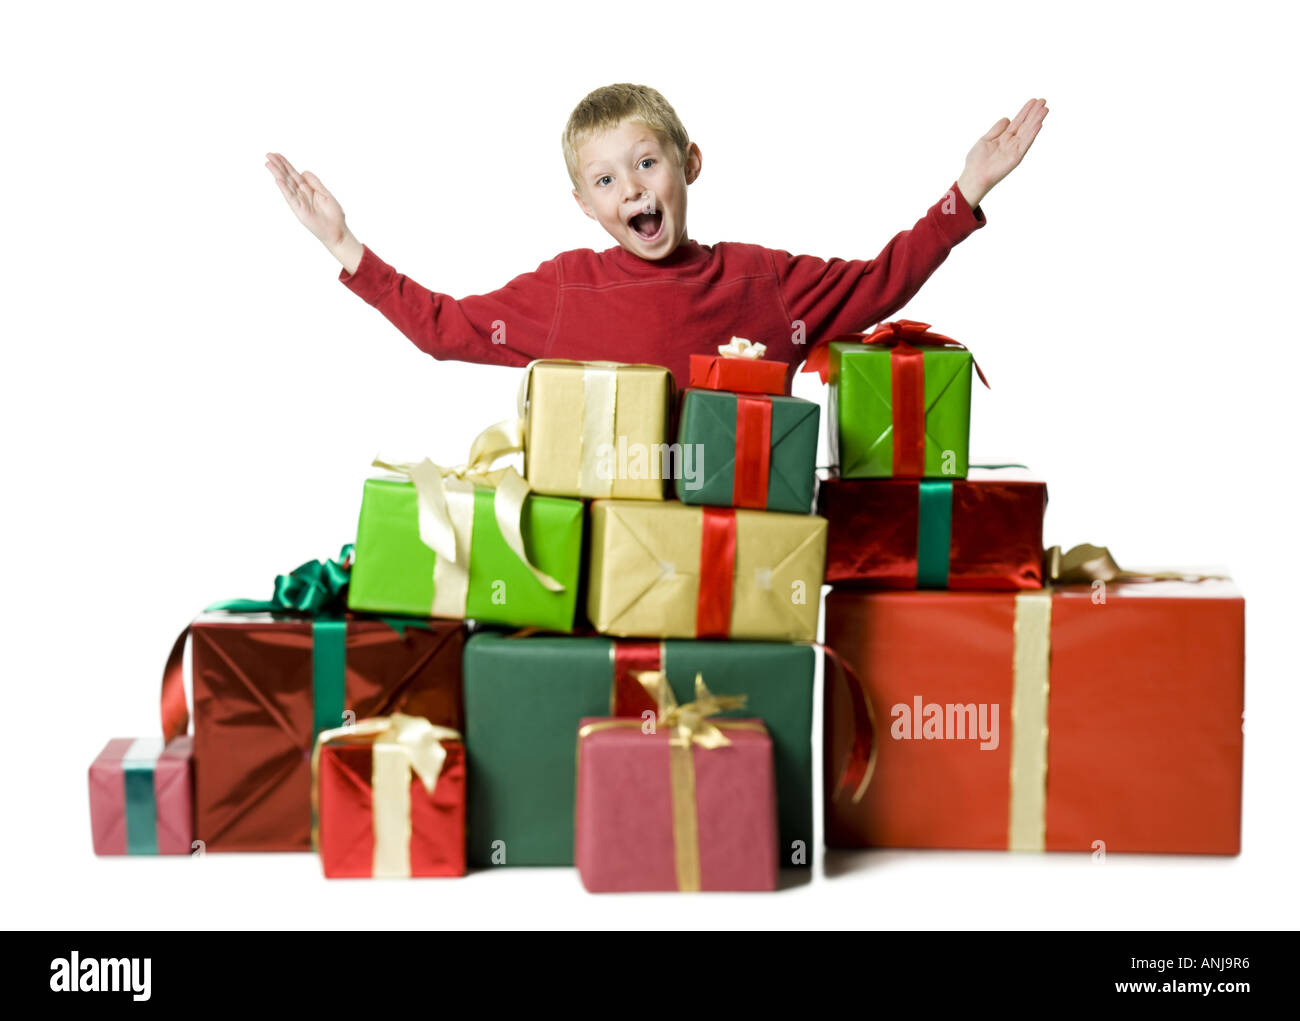 Portrait of a boy standing with his arms raised with gifts around him Stock Photo